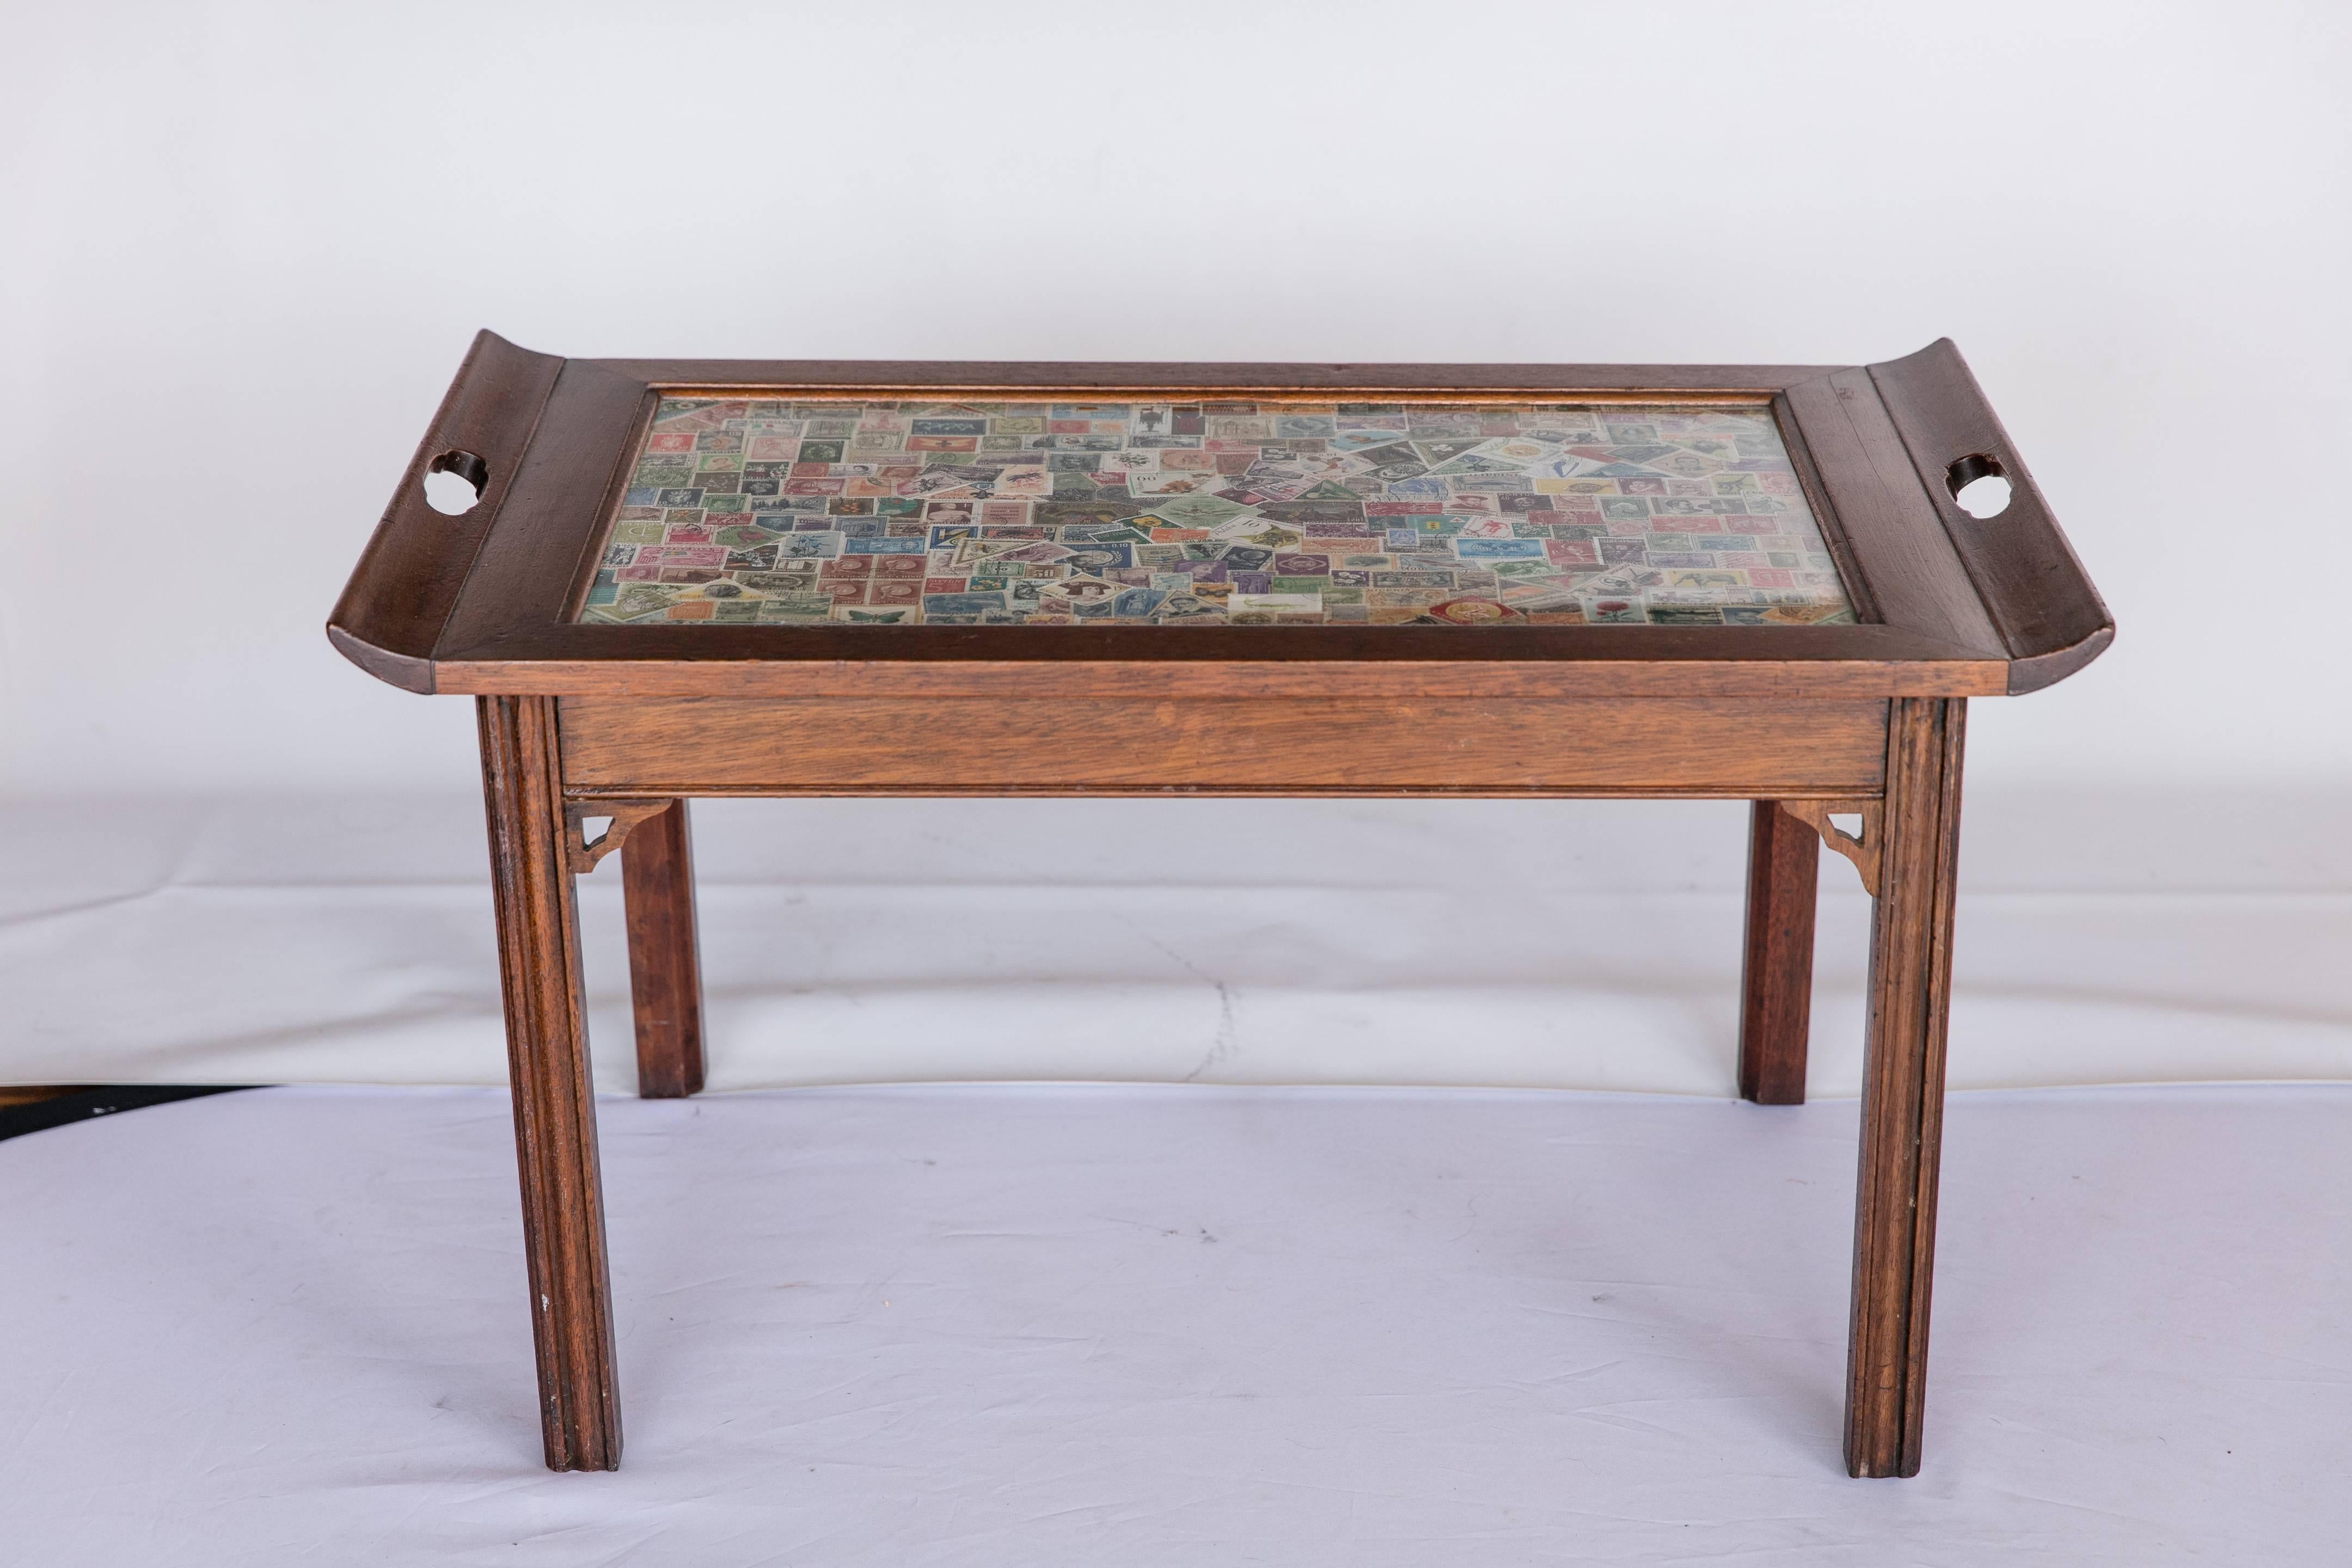 An early 20th century stained wood coffee table with top covered in a collection of international postage stamps. Stamps are protected by a glass top. Top features turned-up ends with handles for lifting and carrying table. The table is from the